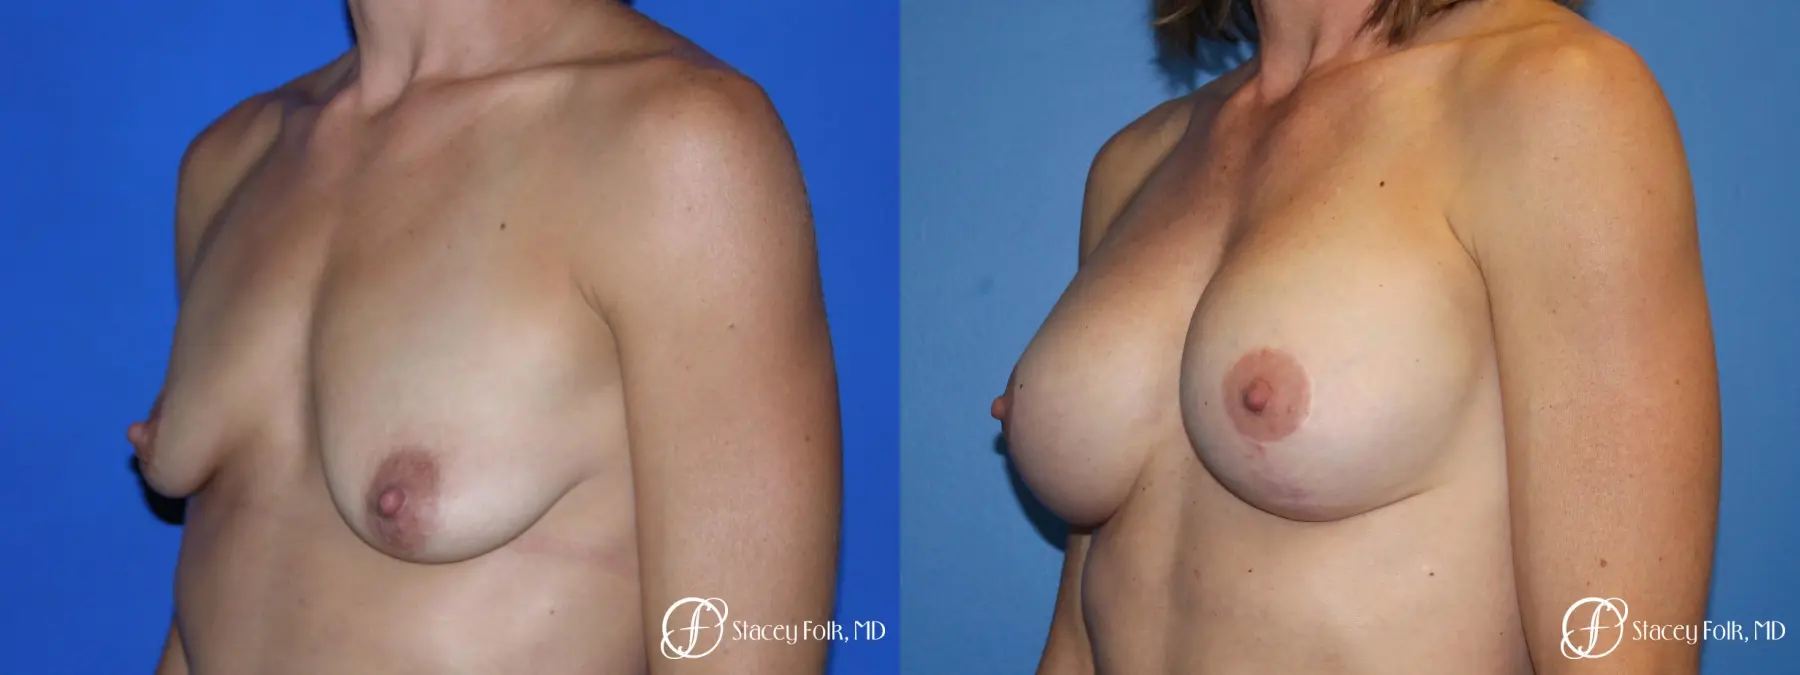 Denver Breast augmentation and breast lift (Mastopexy) 10091 - Before and After 3